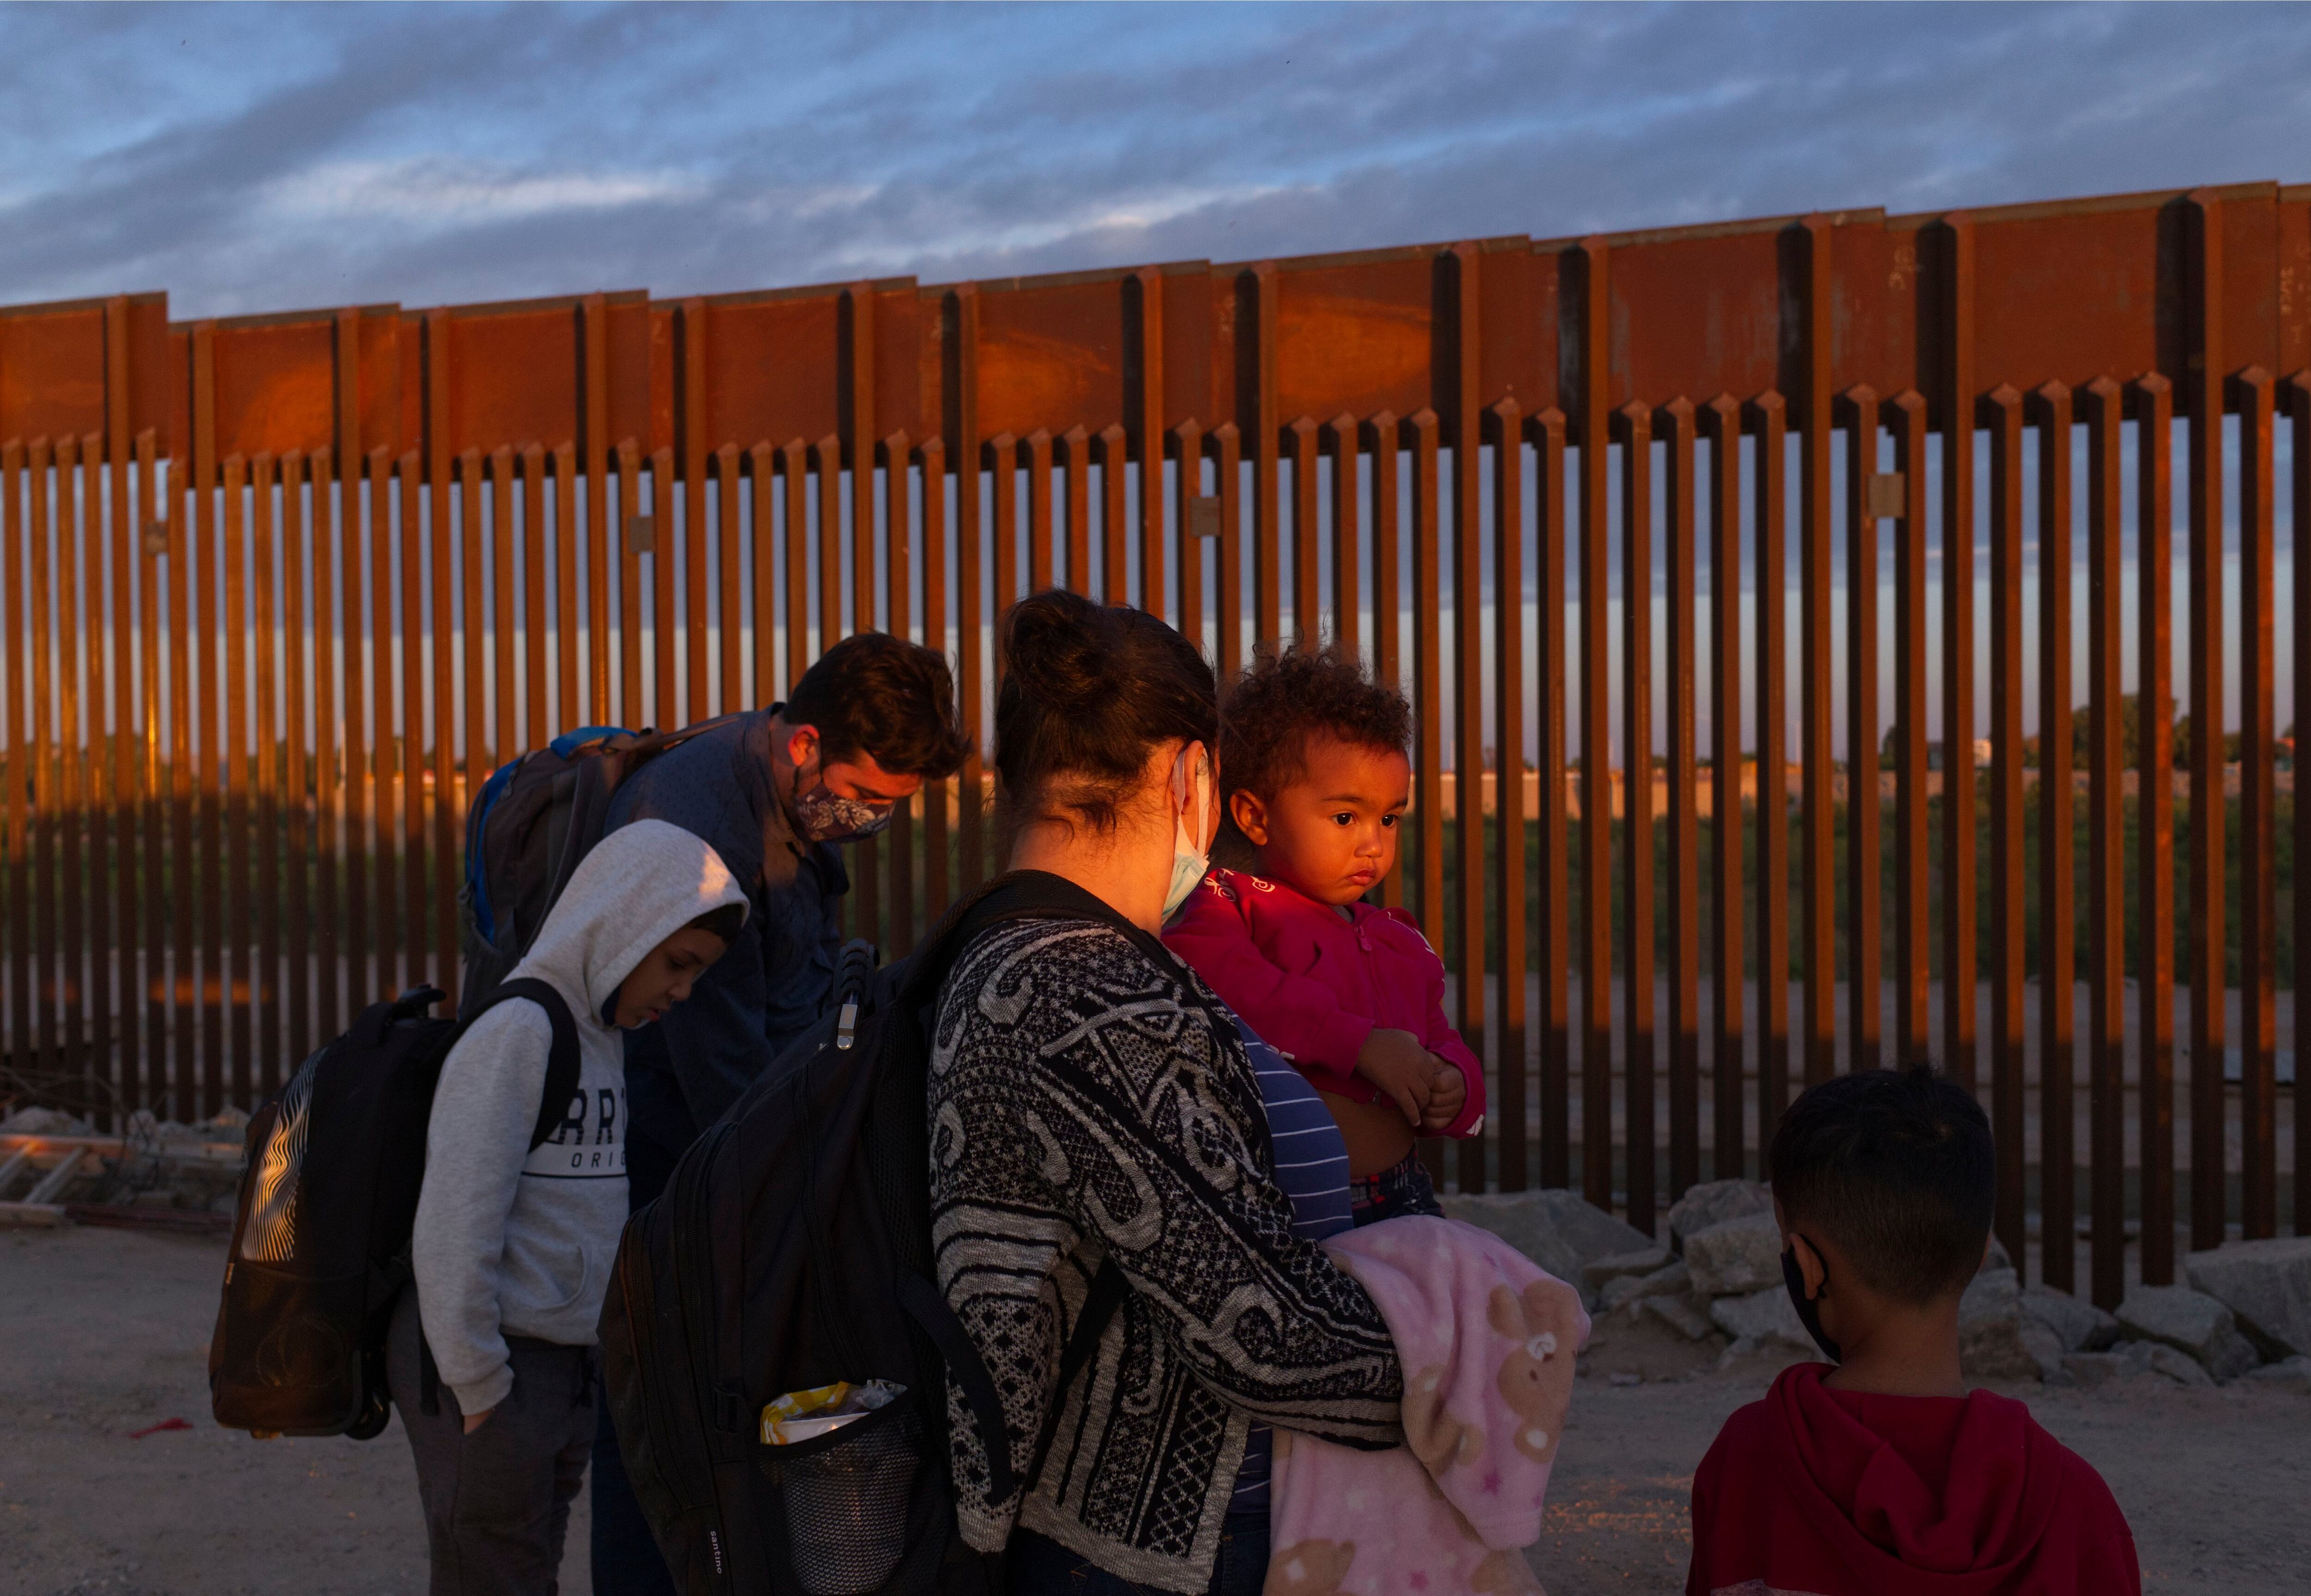 FILE - A pair of migrant families from Brazil wait to be processed by U.S. Border Patrol agents after passing through a gap in the border wall from Mexico in Yuma, Ariz., Thursday, June 10, 2021, to seek asylum.